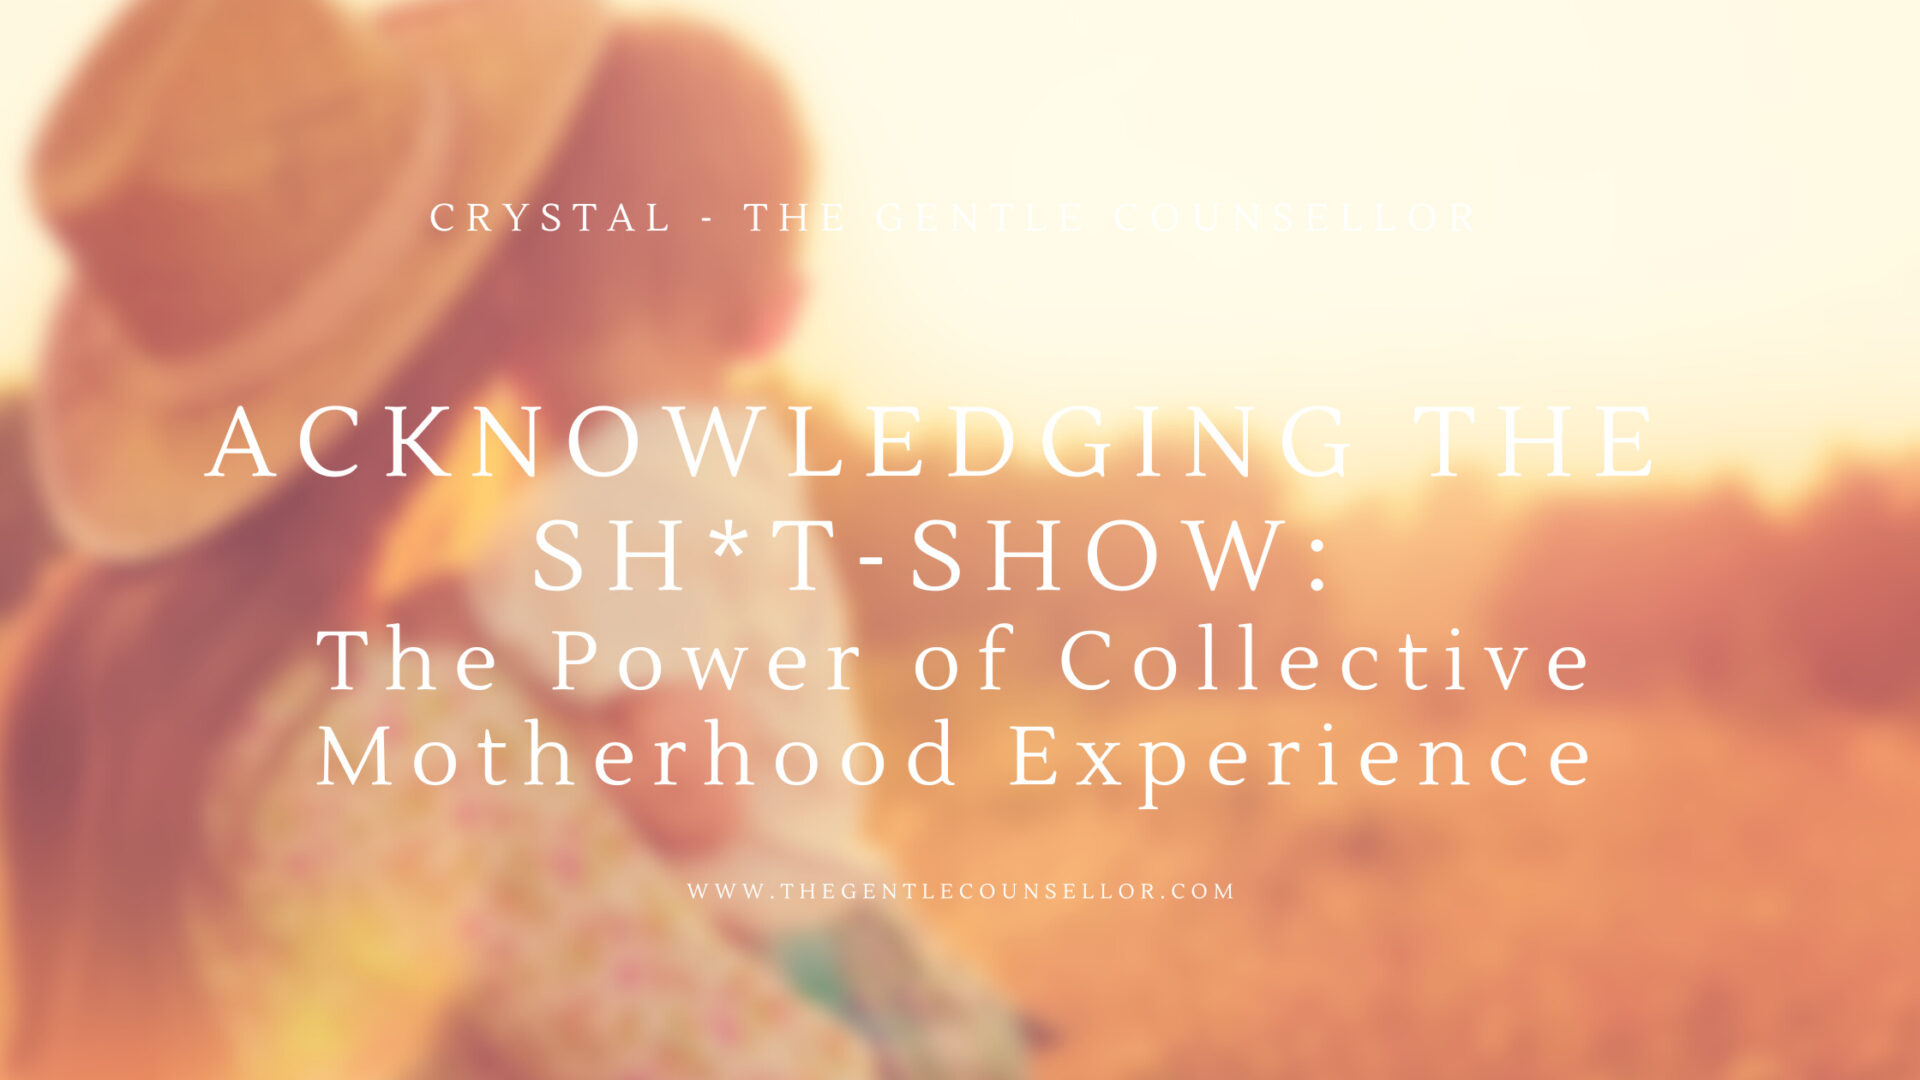 The Power of Collective Motherhood Experience. The Gentle Counsellor